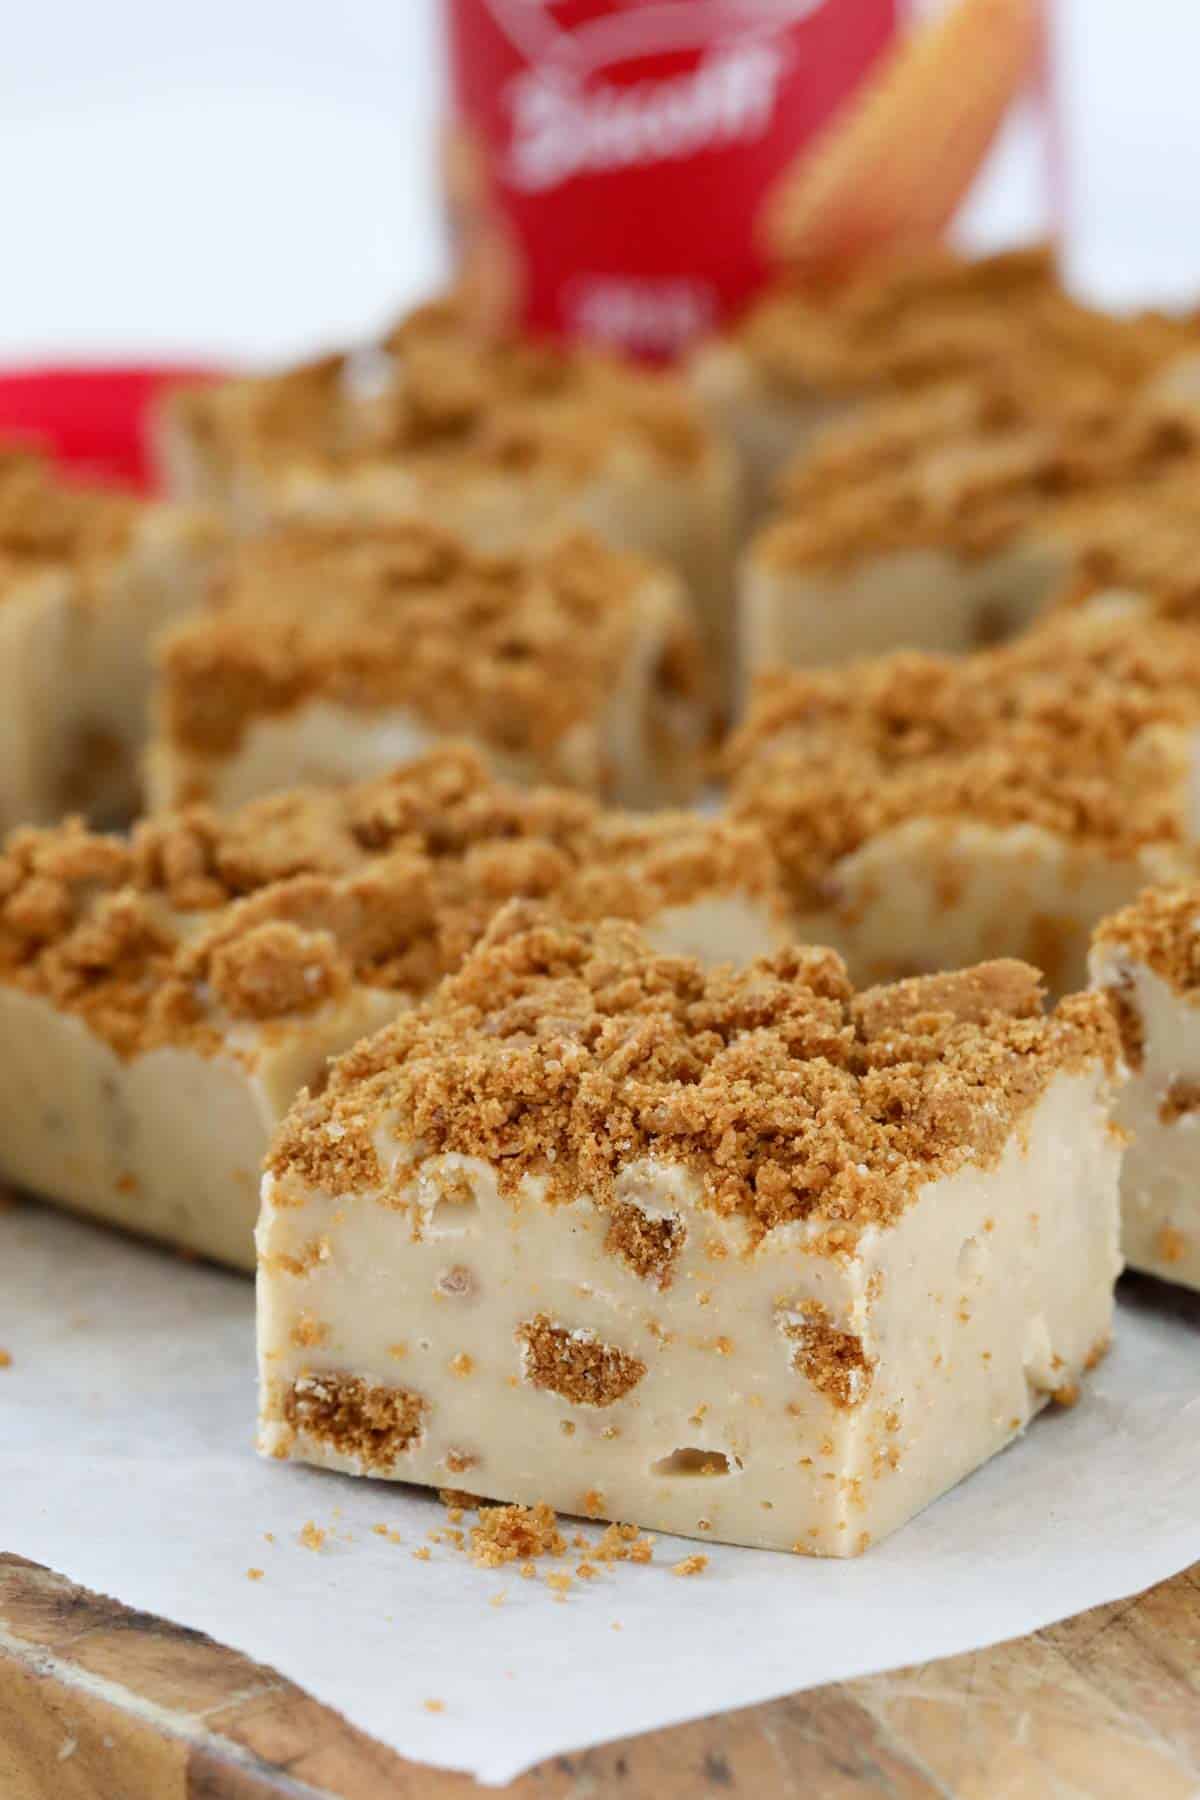 Pieces of creamy fudge with cookie crumbs on top.